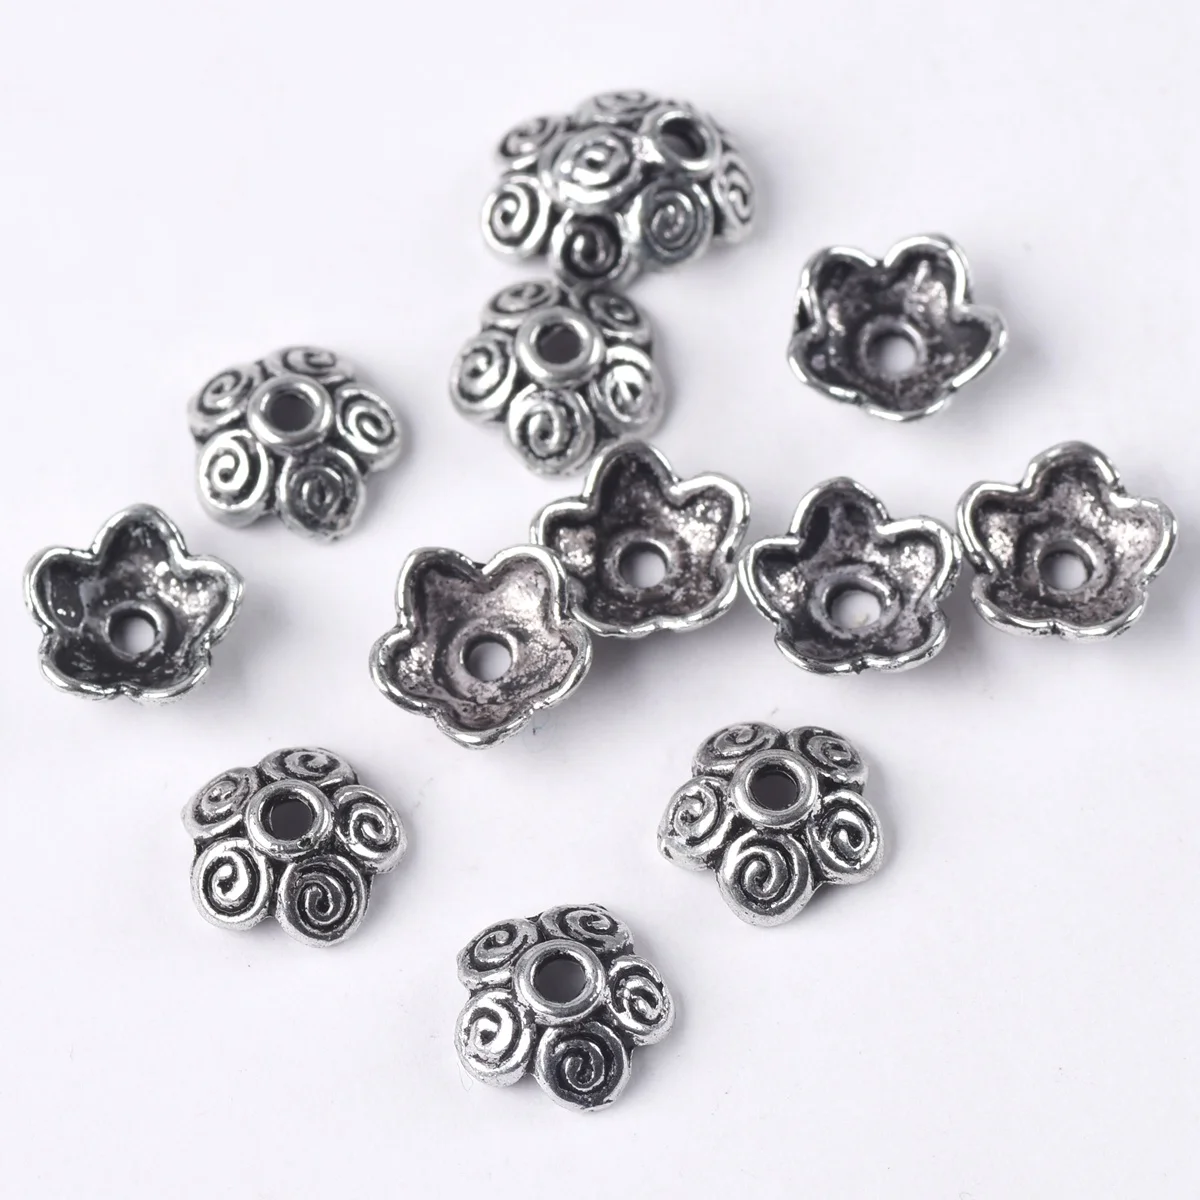 24 Antique Silver Floral Bead Caps Jewelry Making Supplies Bead Caps 10 X  7mm 